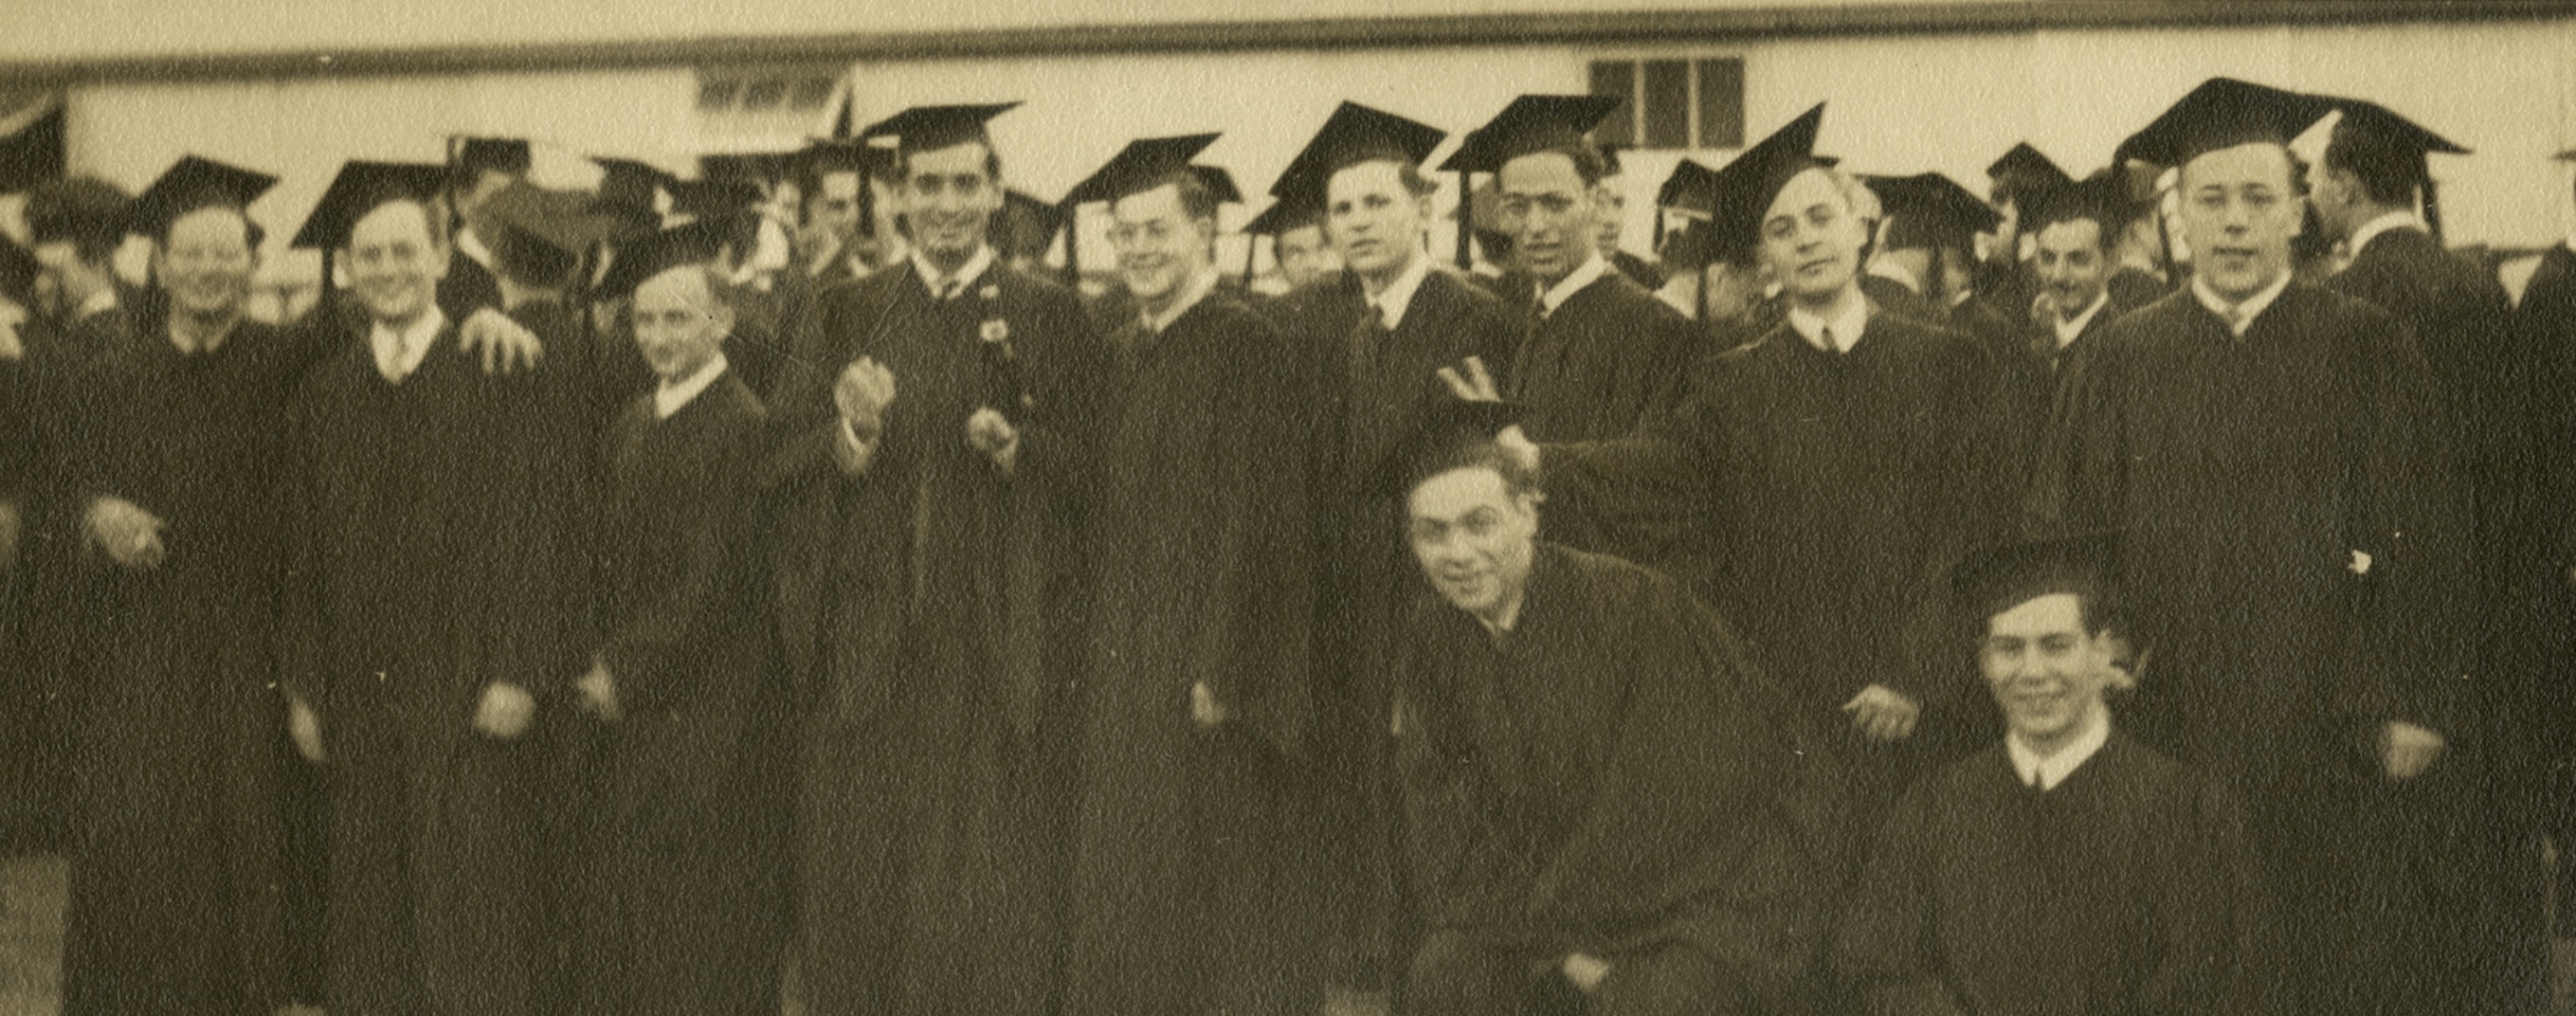 Graduation from City College, 1940